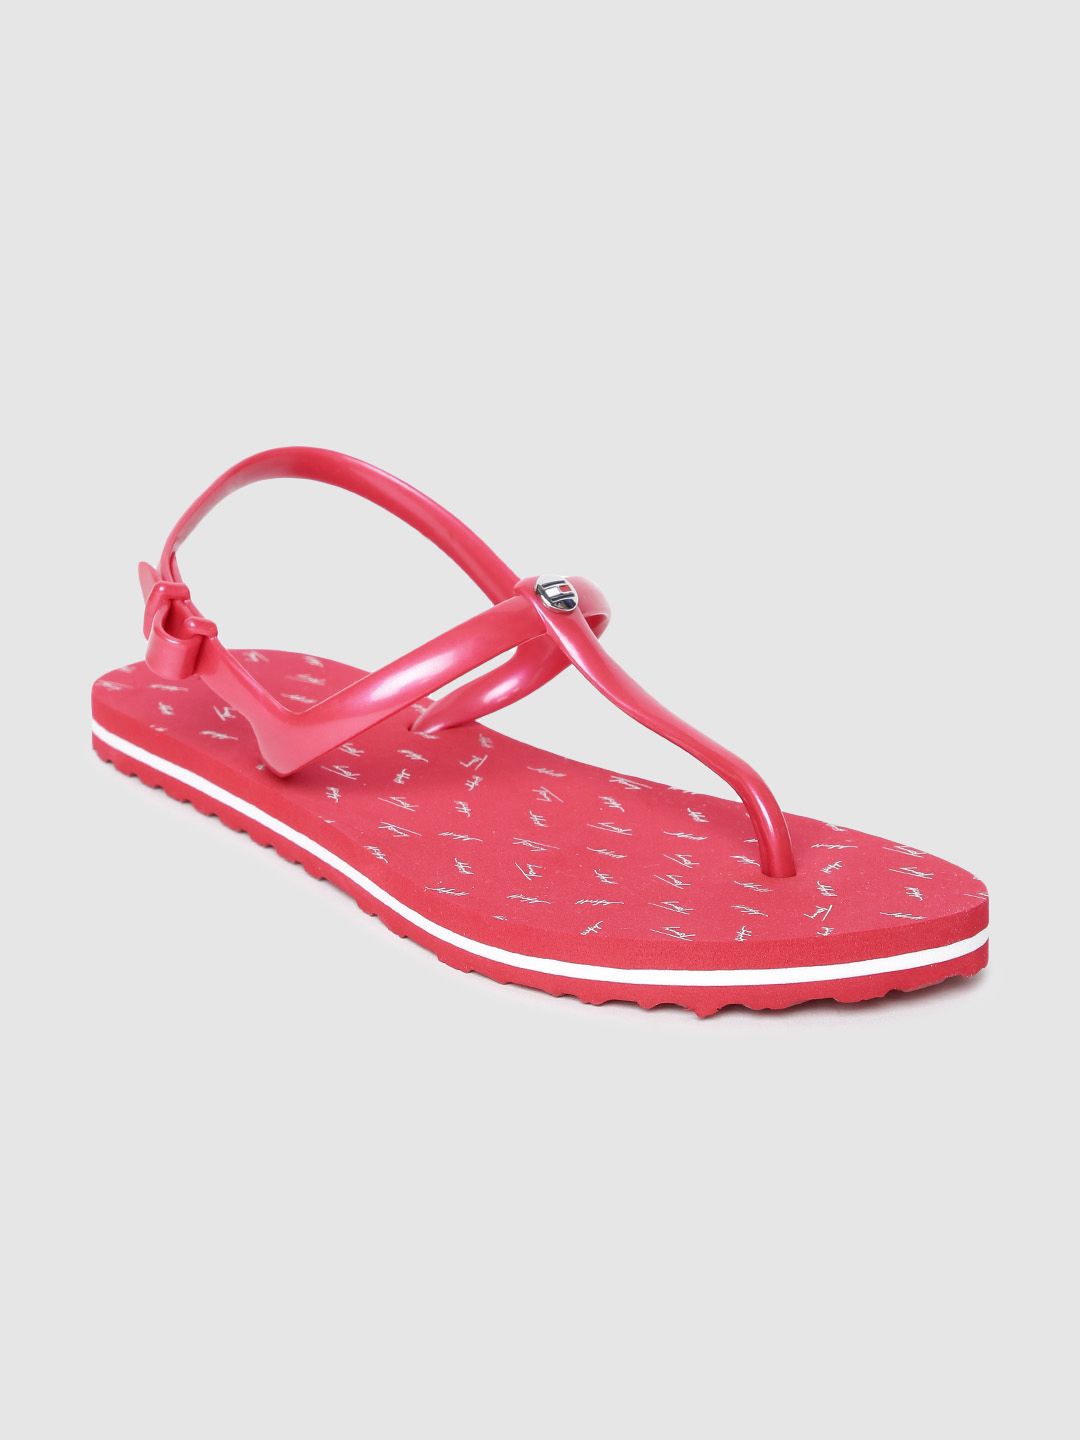 Tommy Hilfiger Women Red Printed T-Strap Flats Price in India